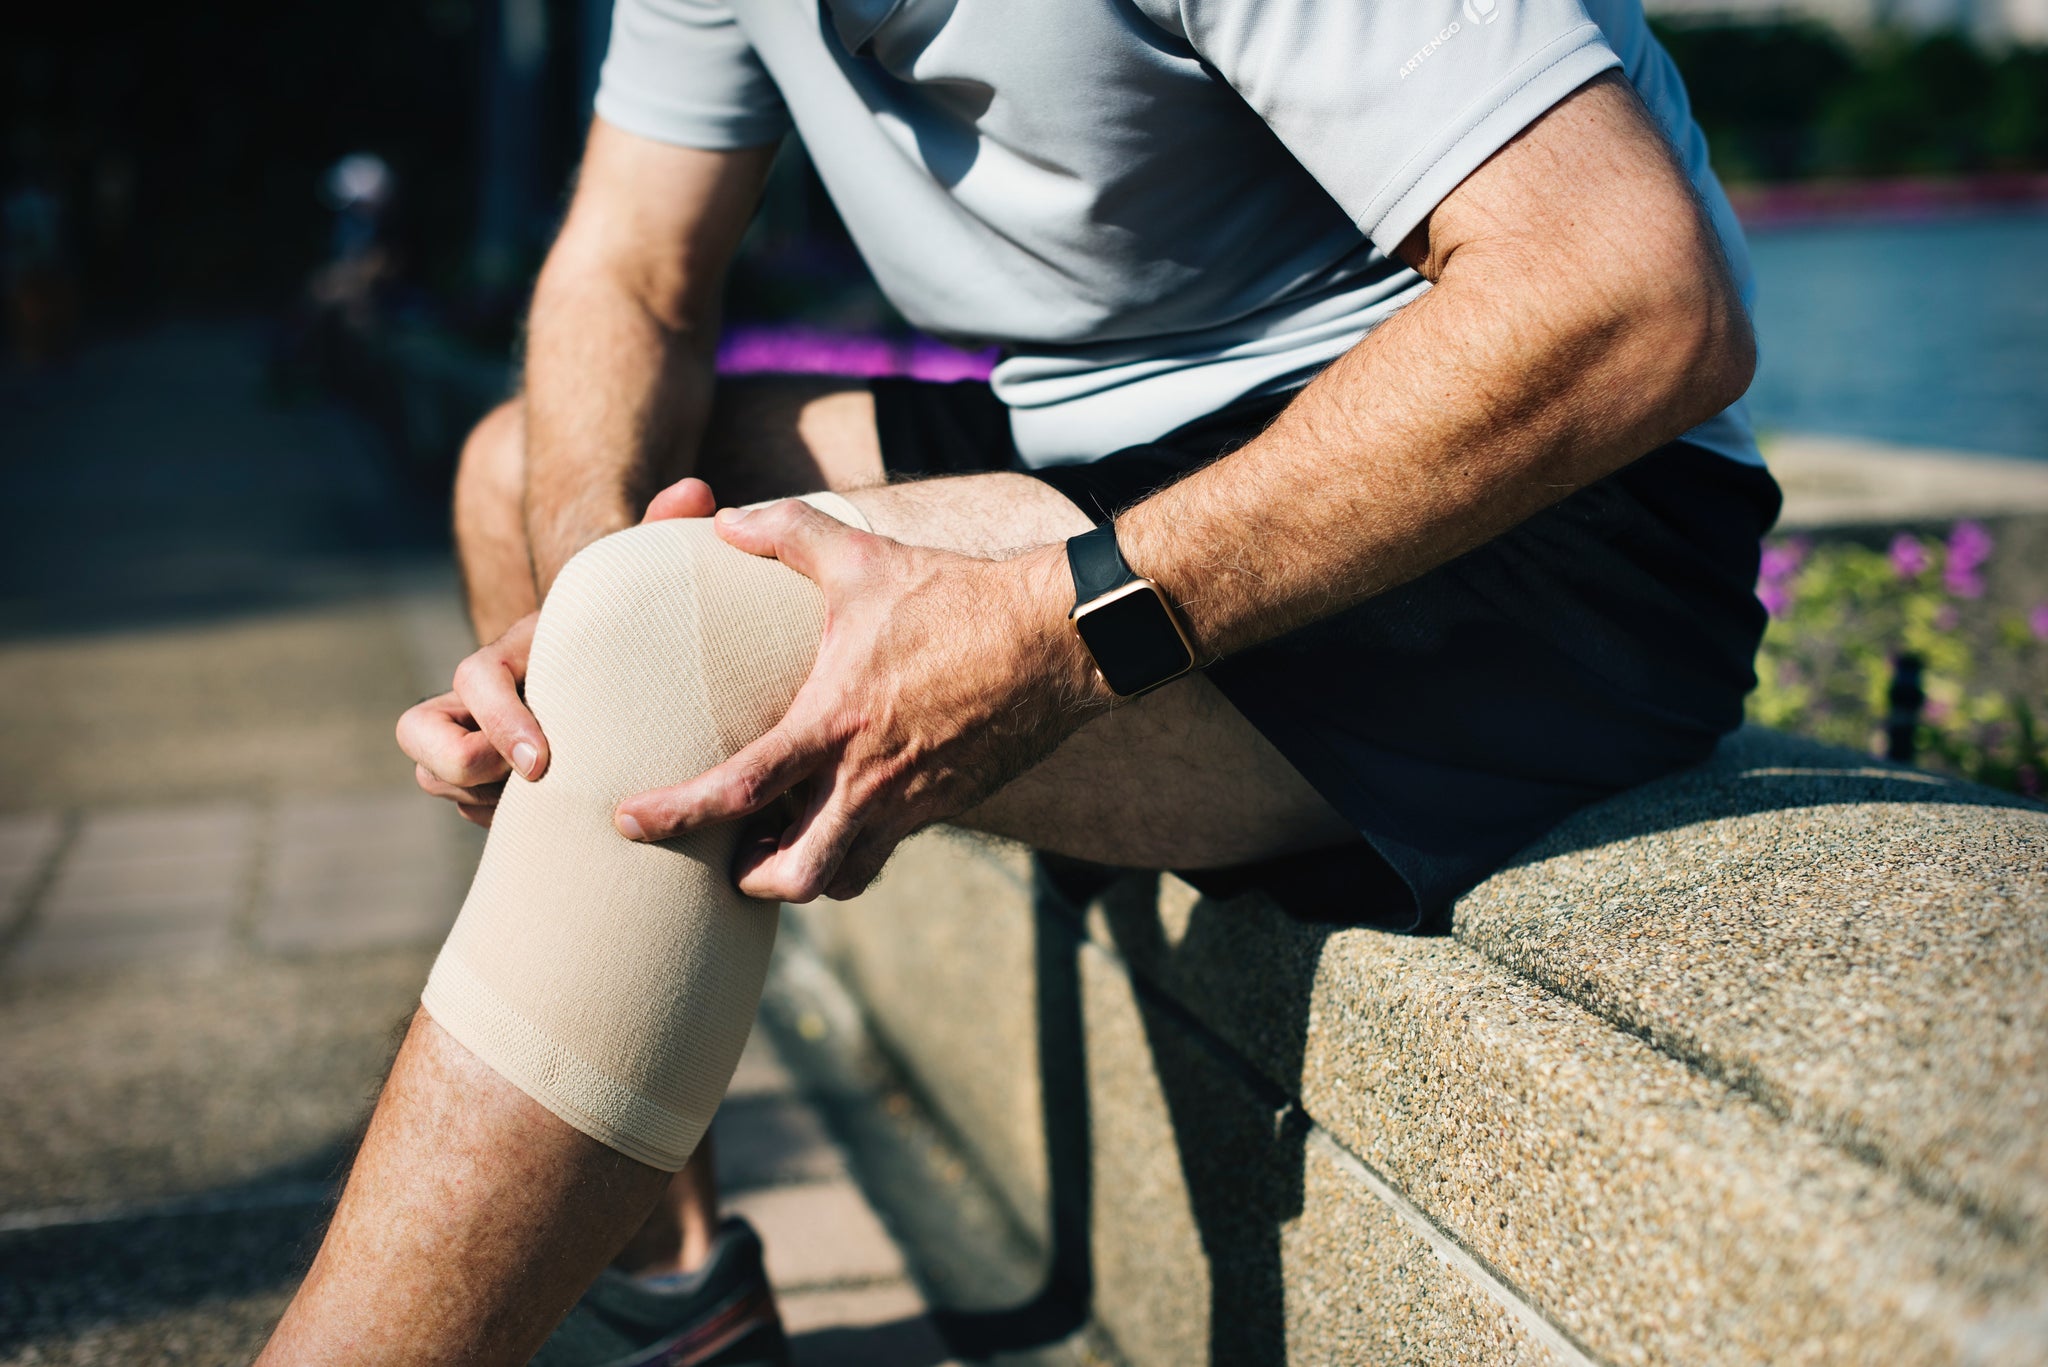 3 ways to Reduce knee pain after a long shift